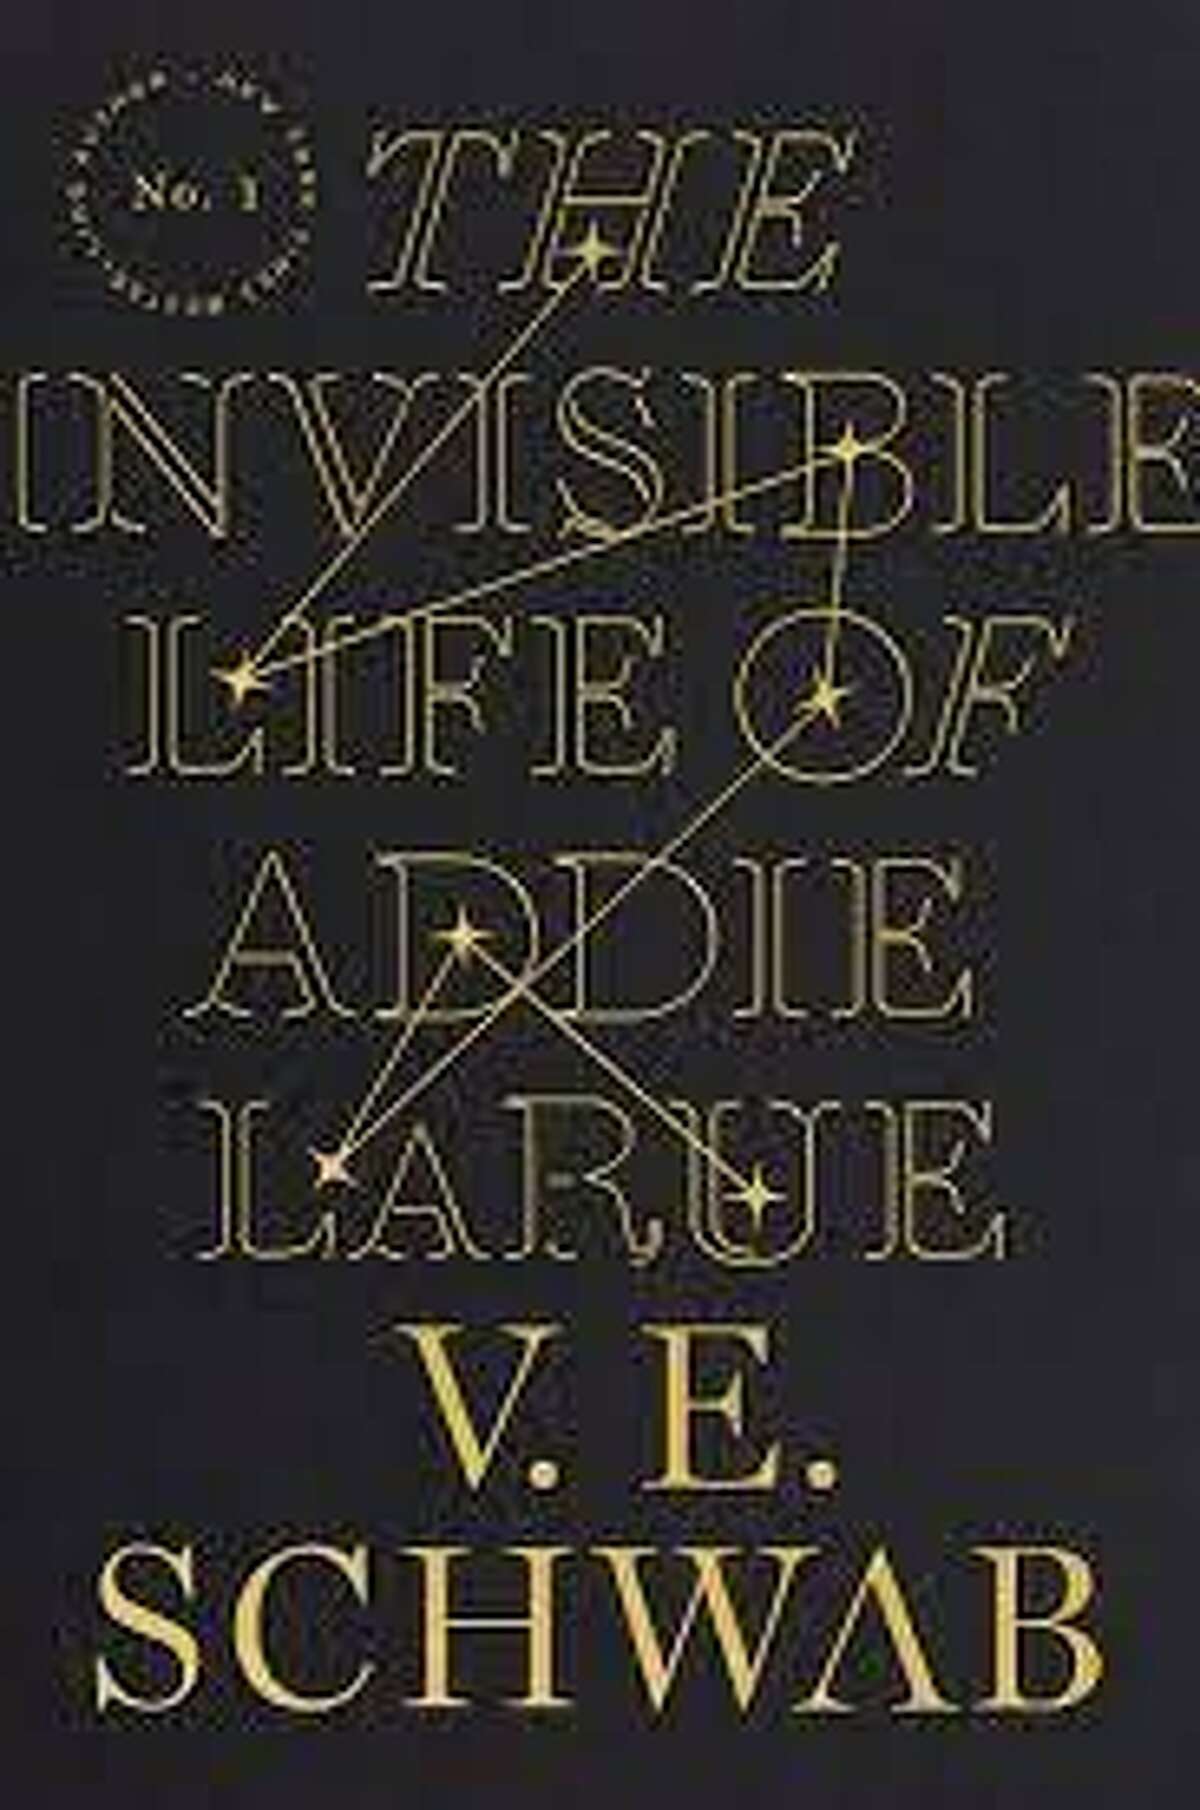 The Westport Library has announced the book selection for the twentieth anniversary of its WestportREADS 2022 community read program. The selection is “The Invisible Life of Addie LaRue,” a copy of the book cover for which is shown, by author V.E. Schwab, whom the library is also hosting for the event.